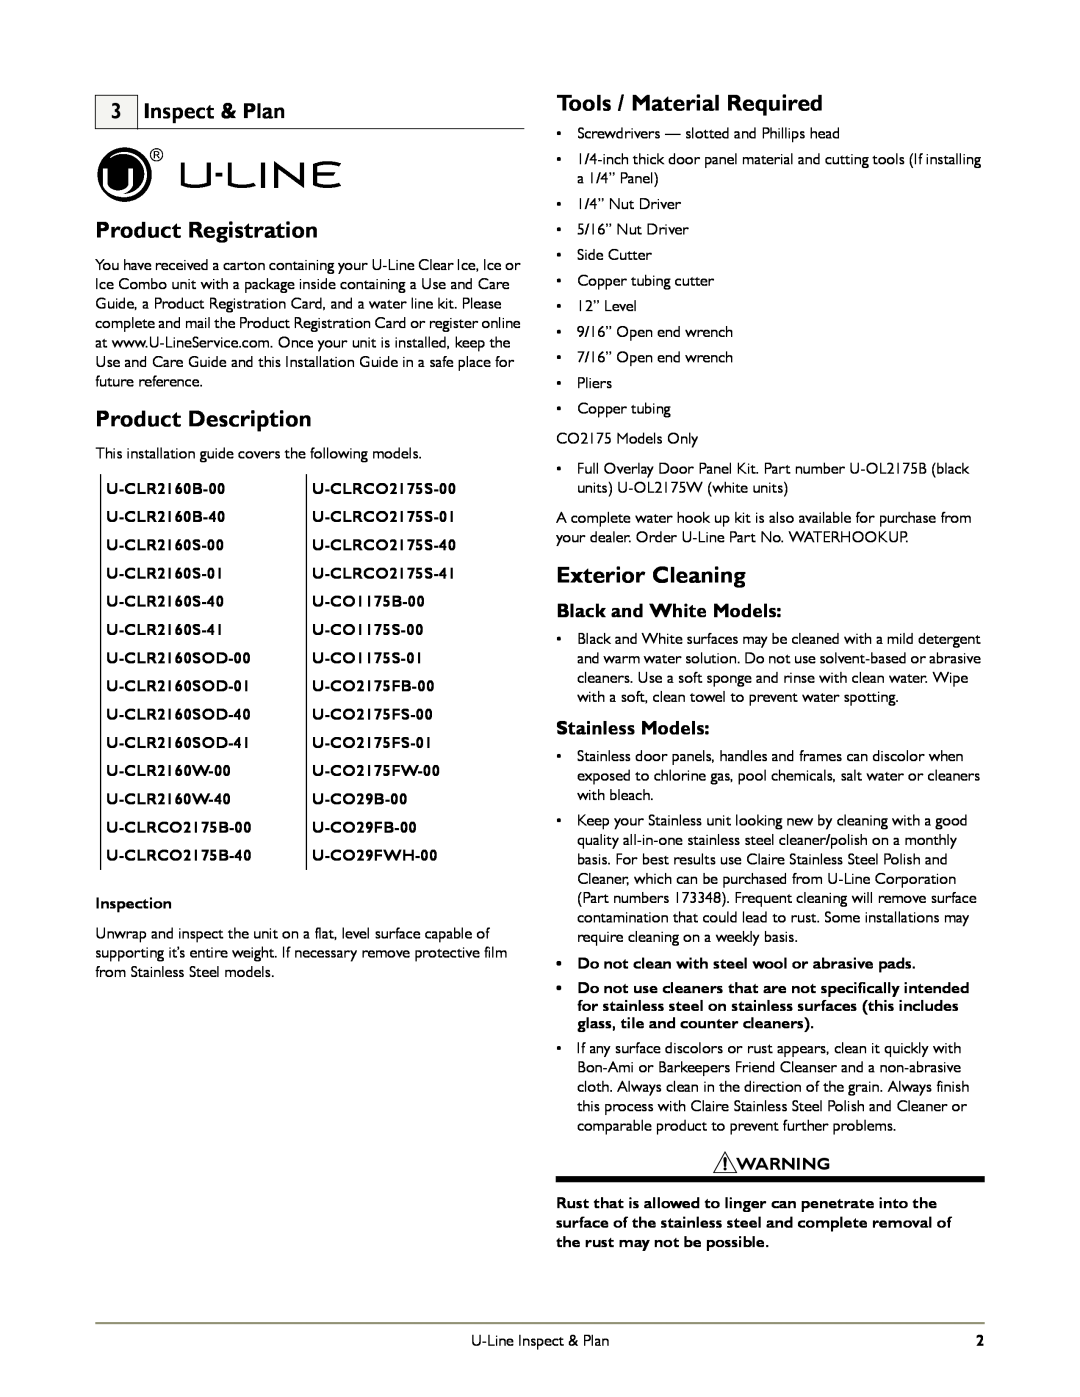 U-Line CO1175 Product Registration, Product Description, Tools / Material Required, Exterior Cleaning, Inspect & Plan 